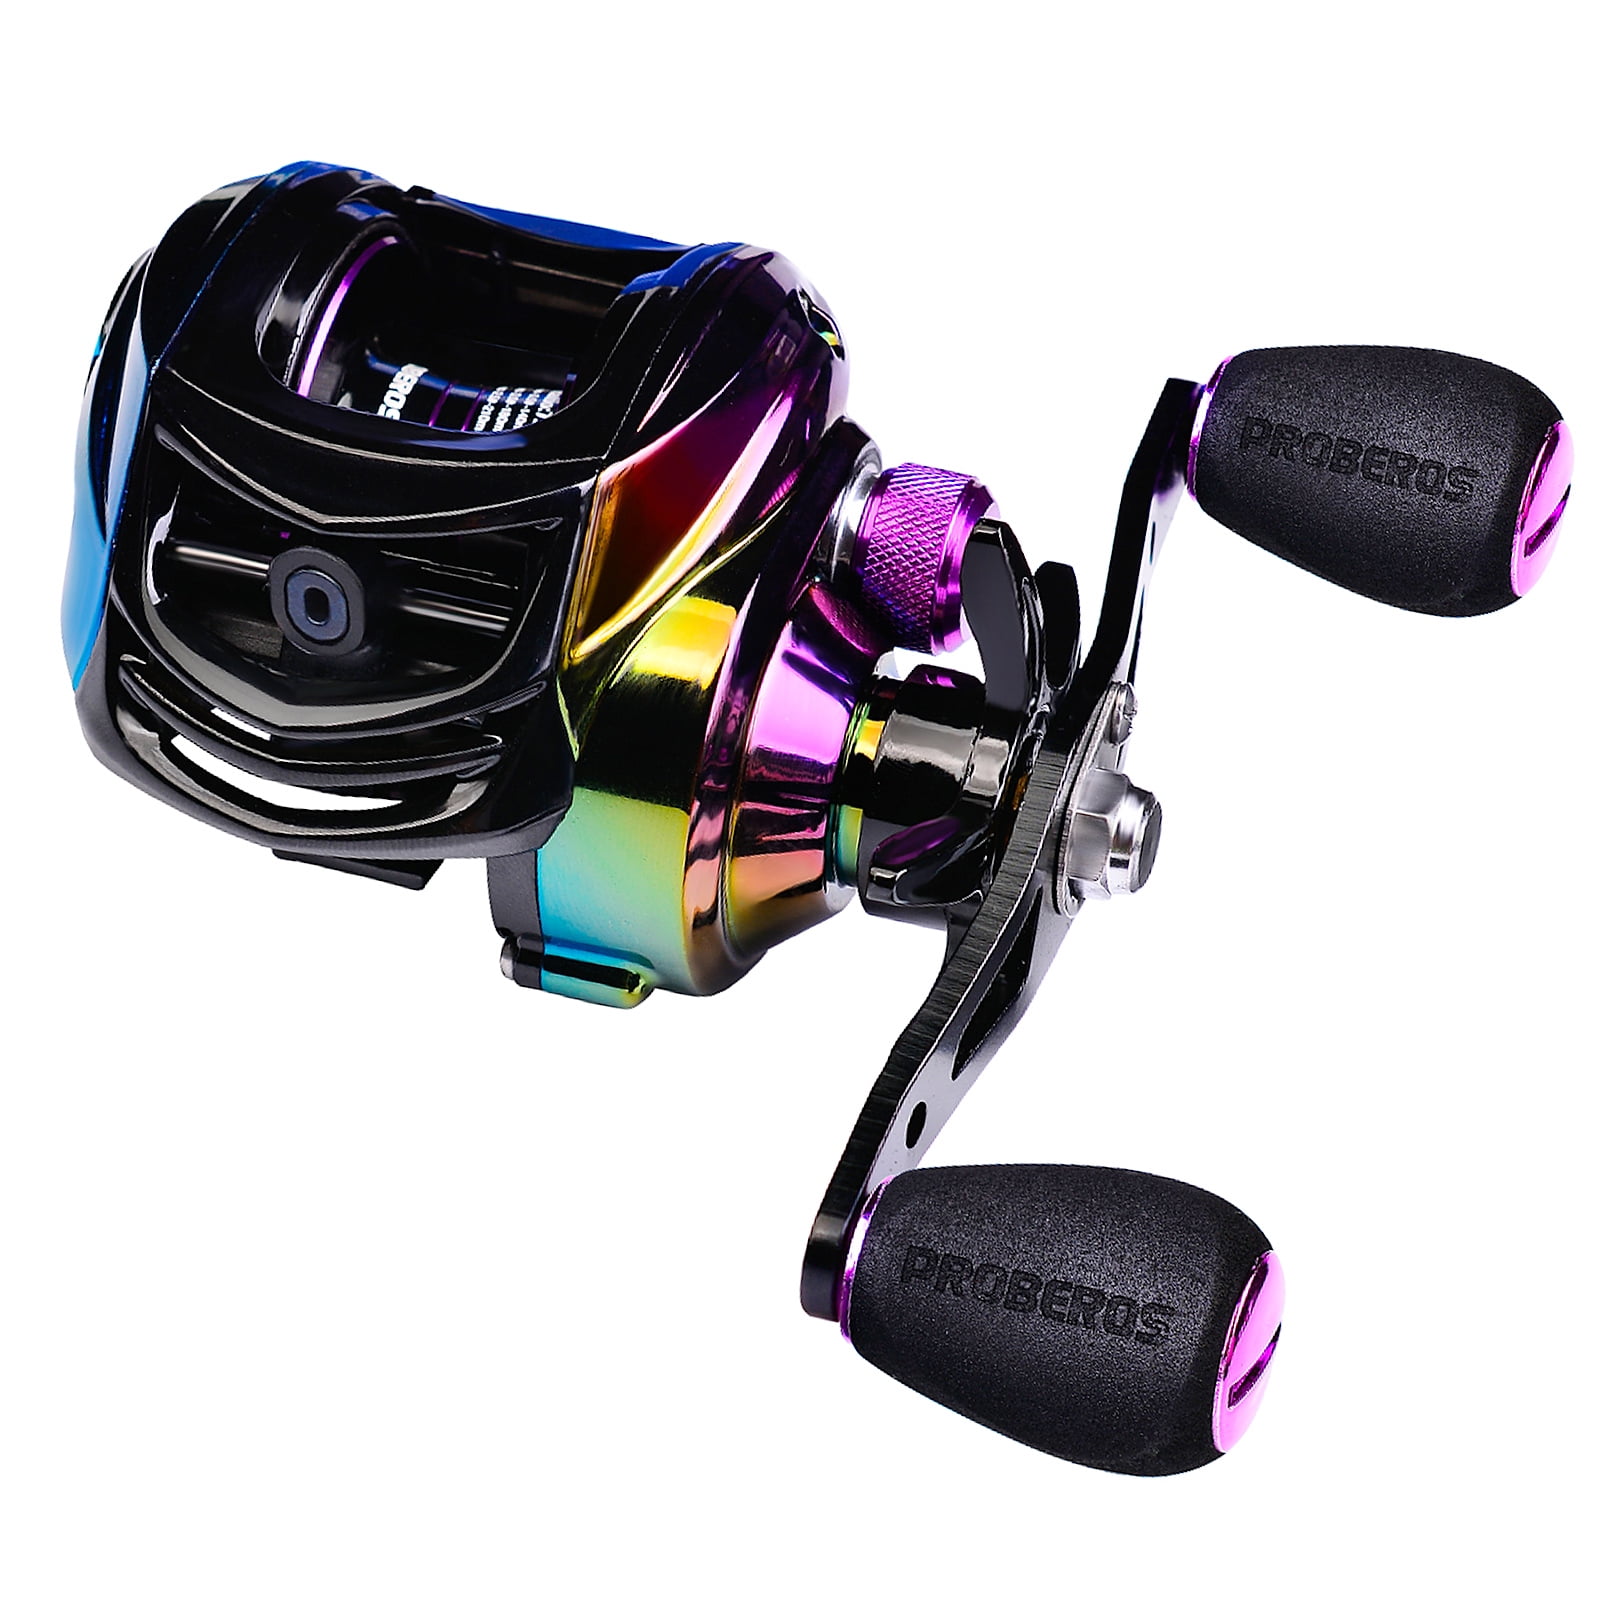 9+1 Bb Bearing Fishing Baitcast Reel High Speed 7.2:1 Fishing Reel Bait Cast Wheel Left/Right Hand Fishing Accessory, Size: DW130P, Other